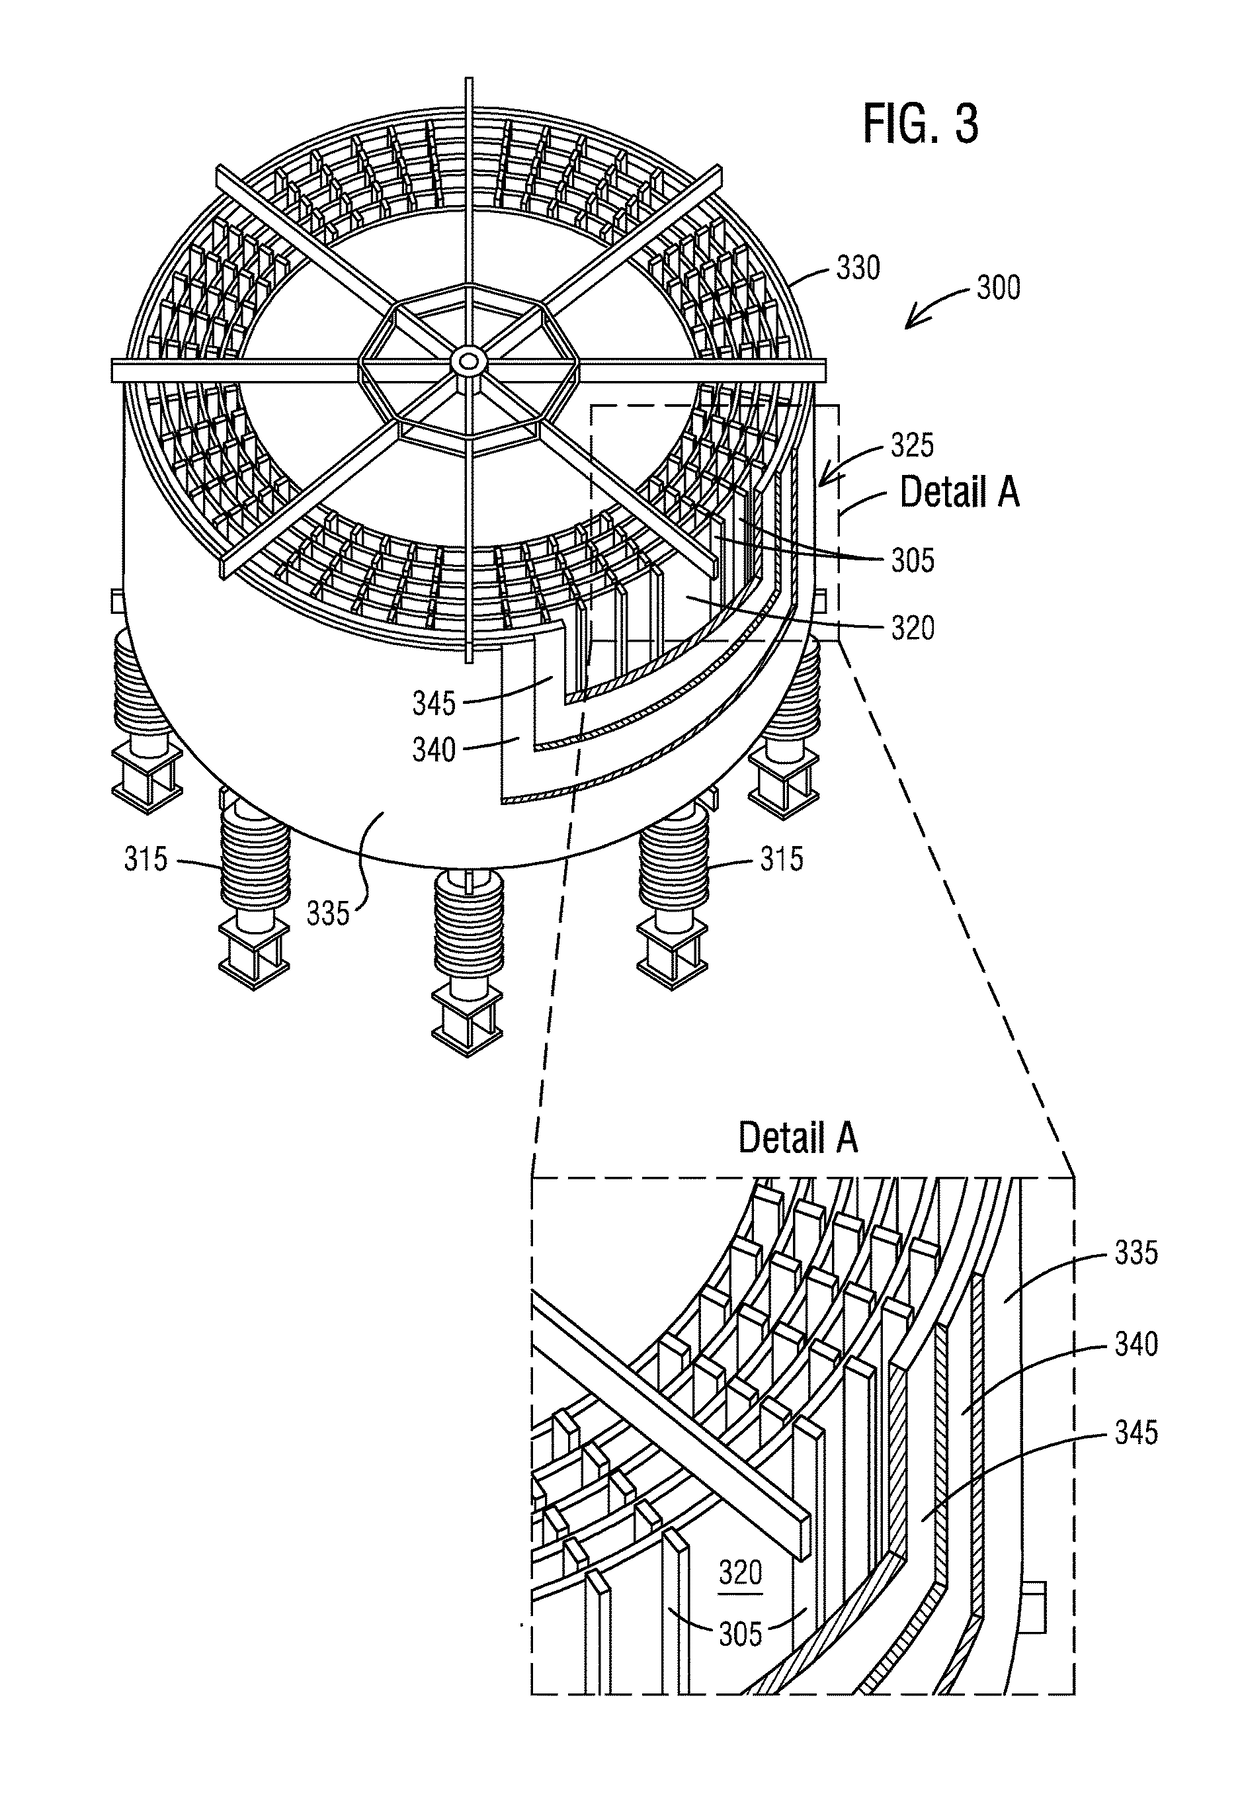 Intergrated barrier for protecting the coil of air core reactor from projectile attack